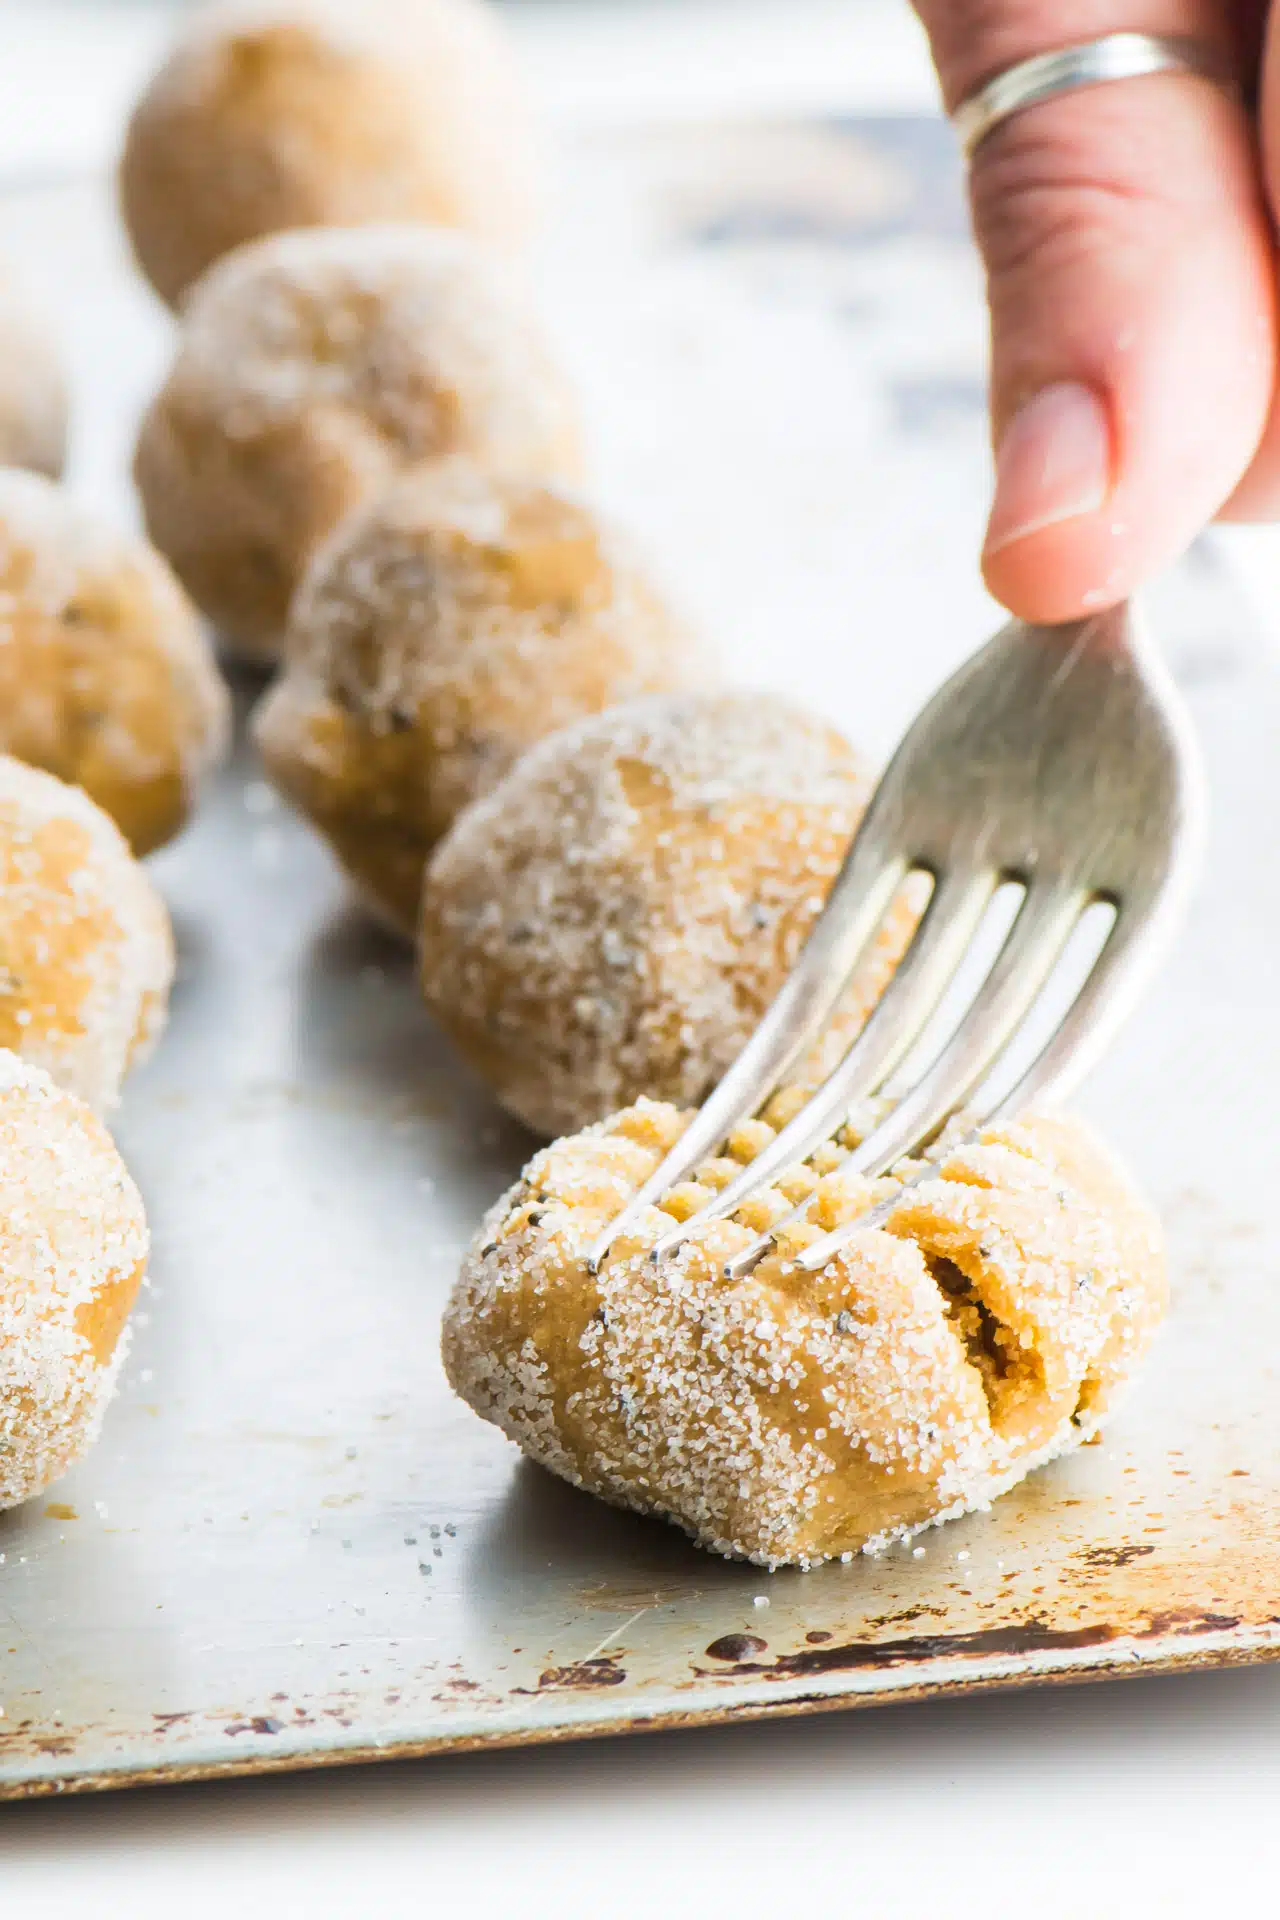 A fork is pressing down on the sugared cookie dough balls, gently pressing them and creating criss-cross indentations in the cookies.